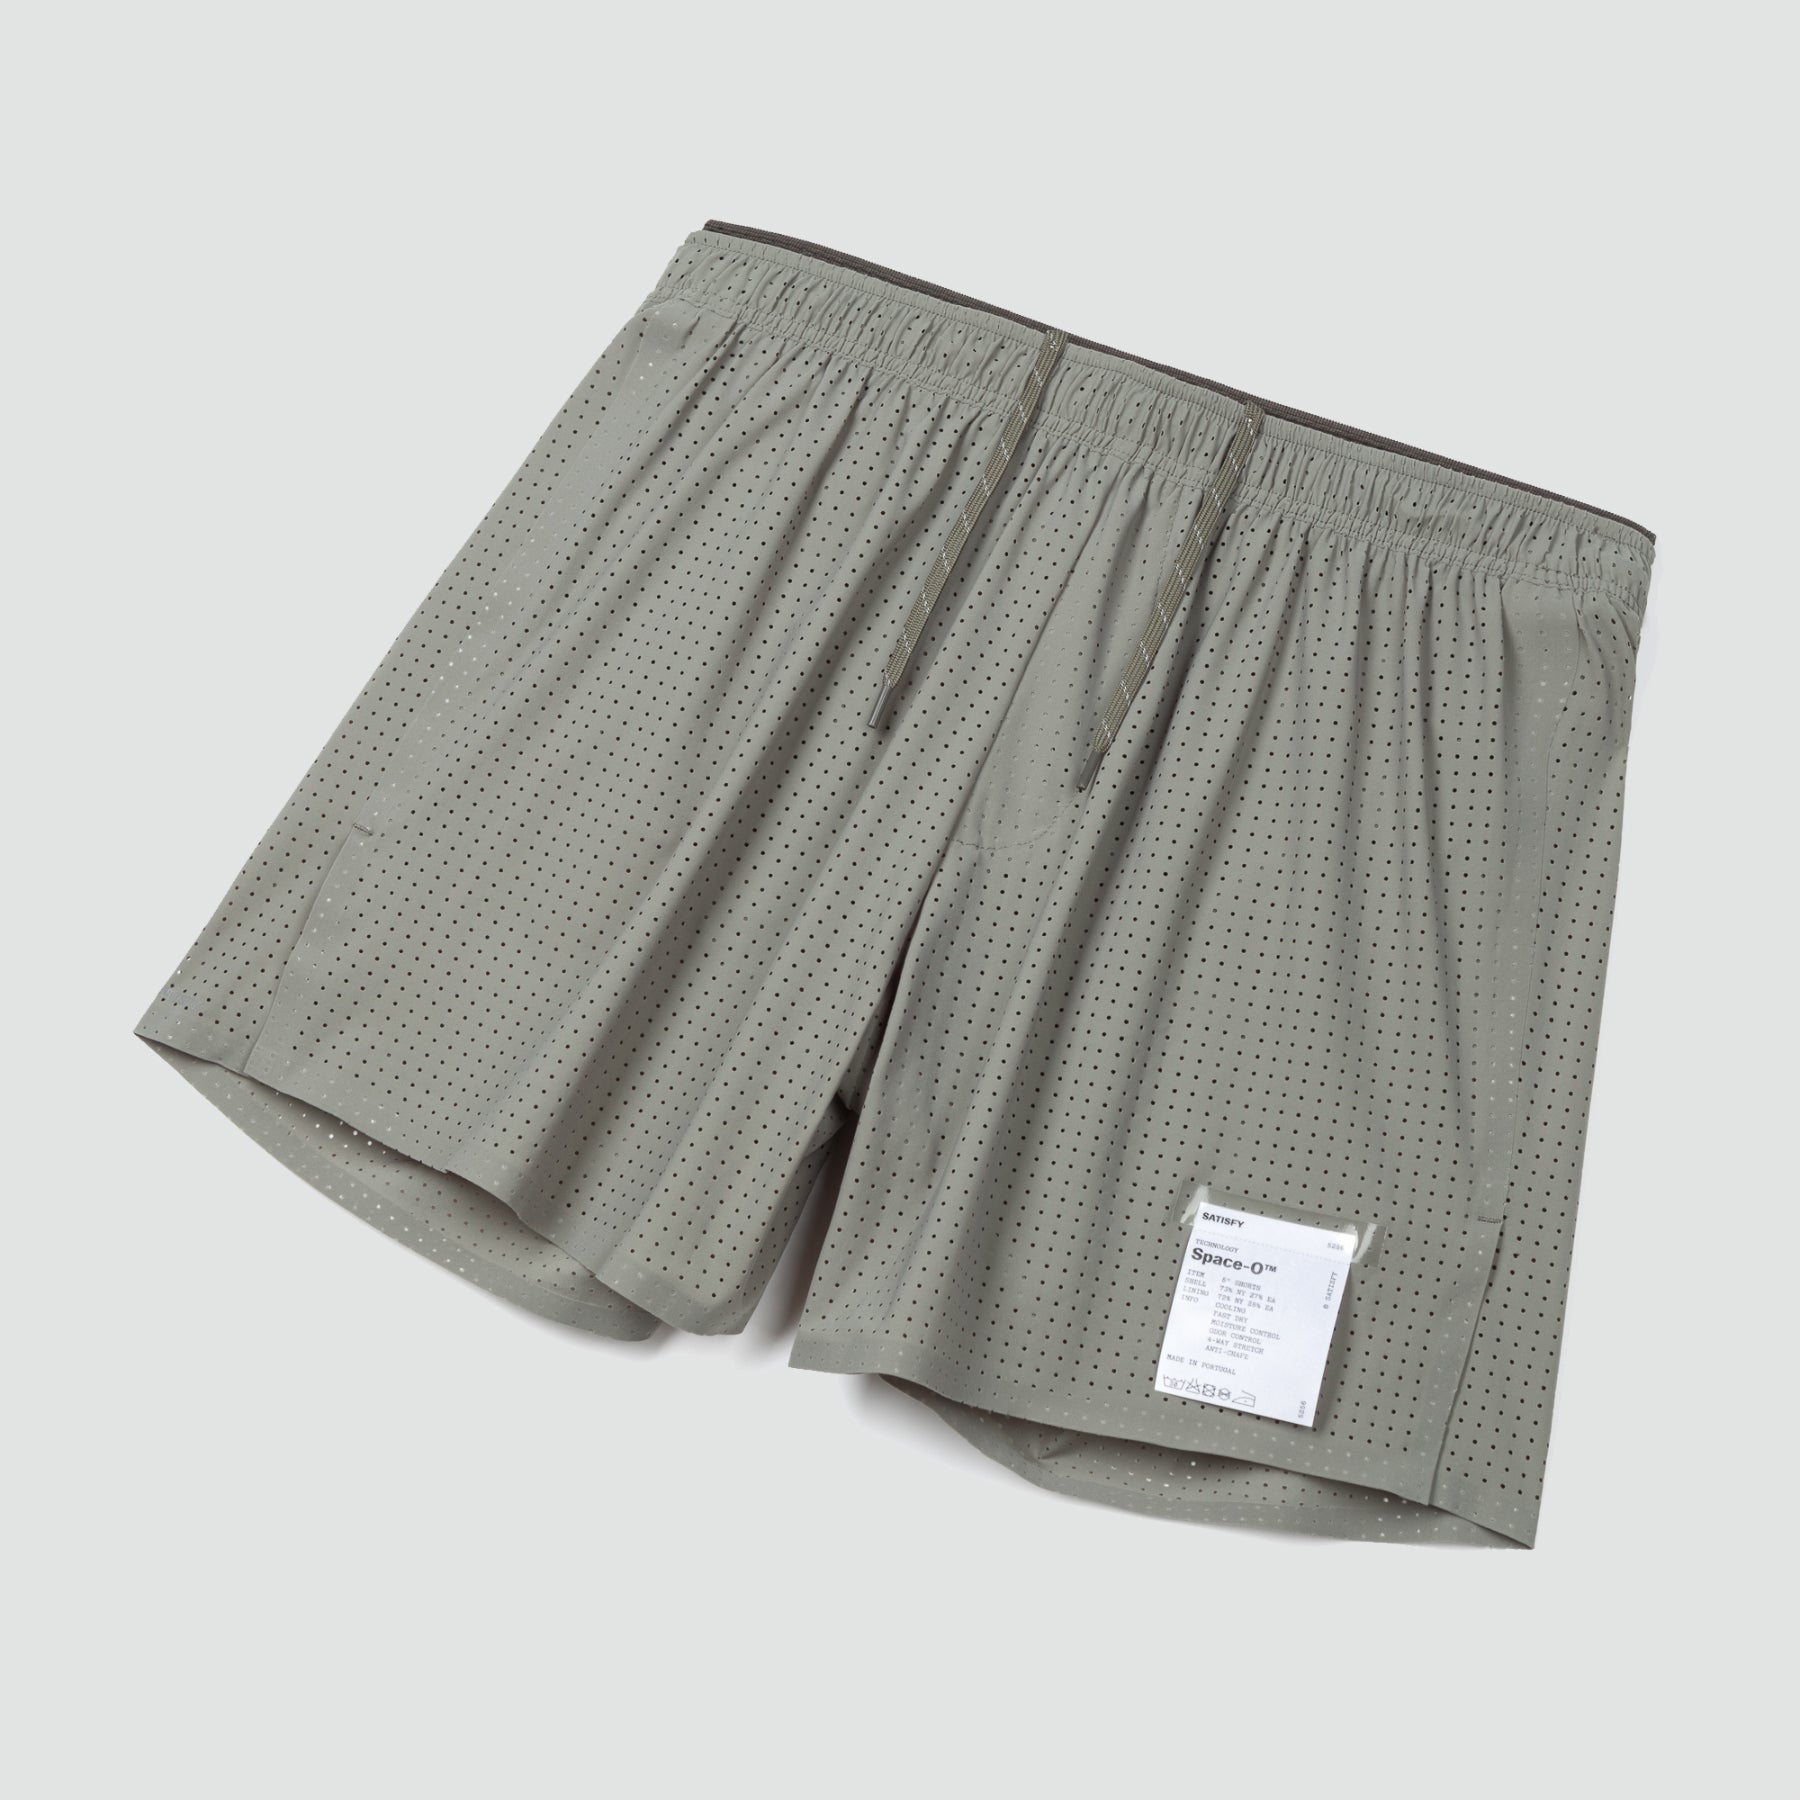 Space-O™ 5&quot; Shorts - Dry Sage